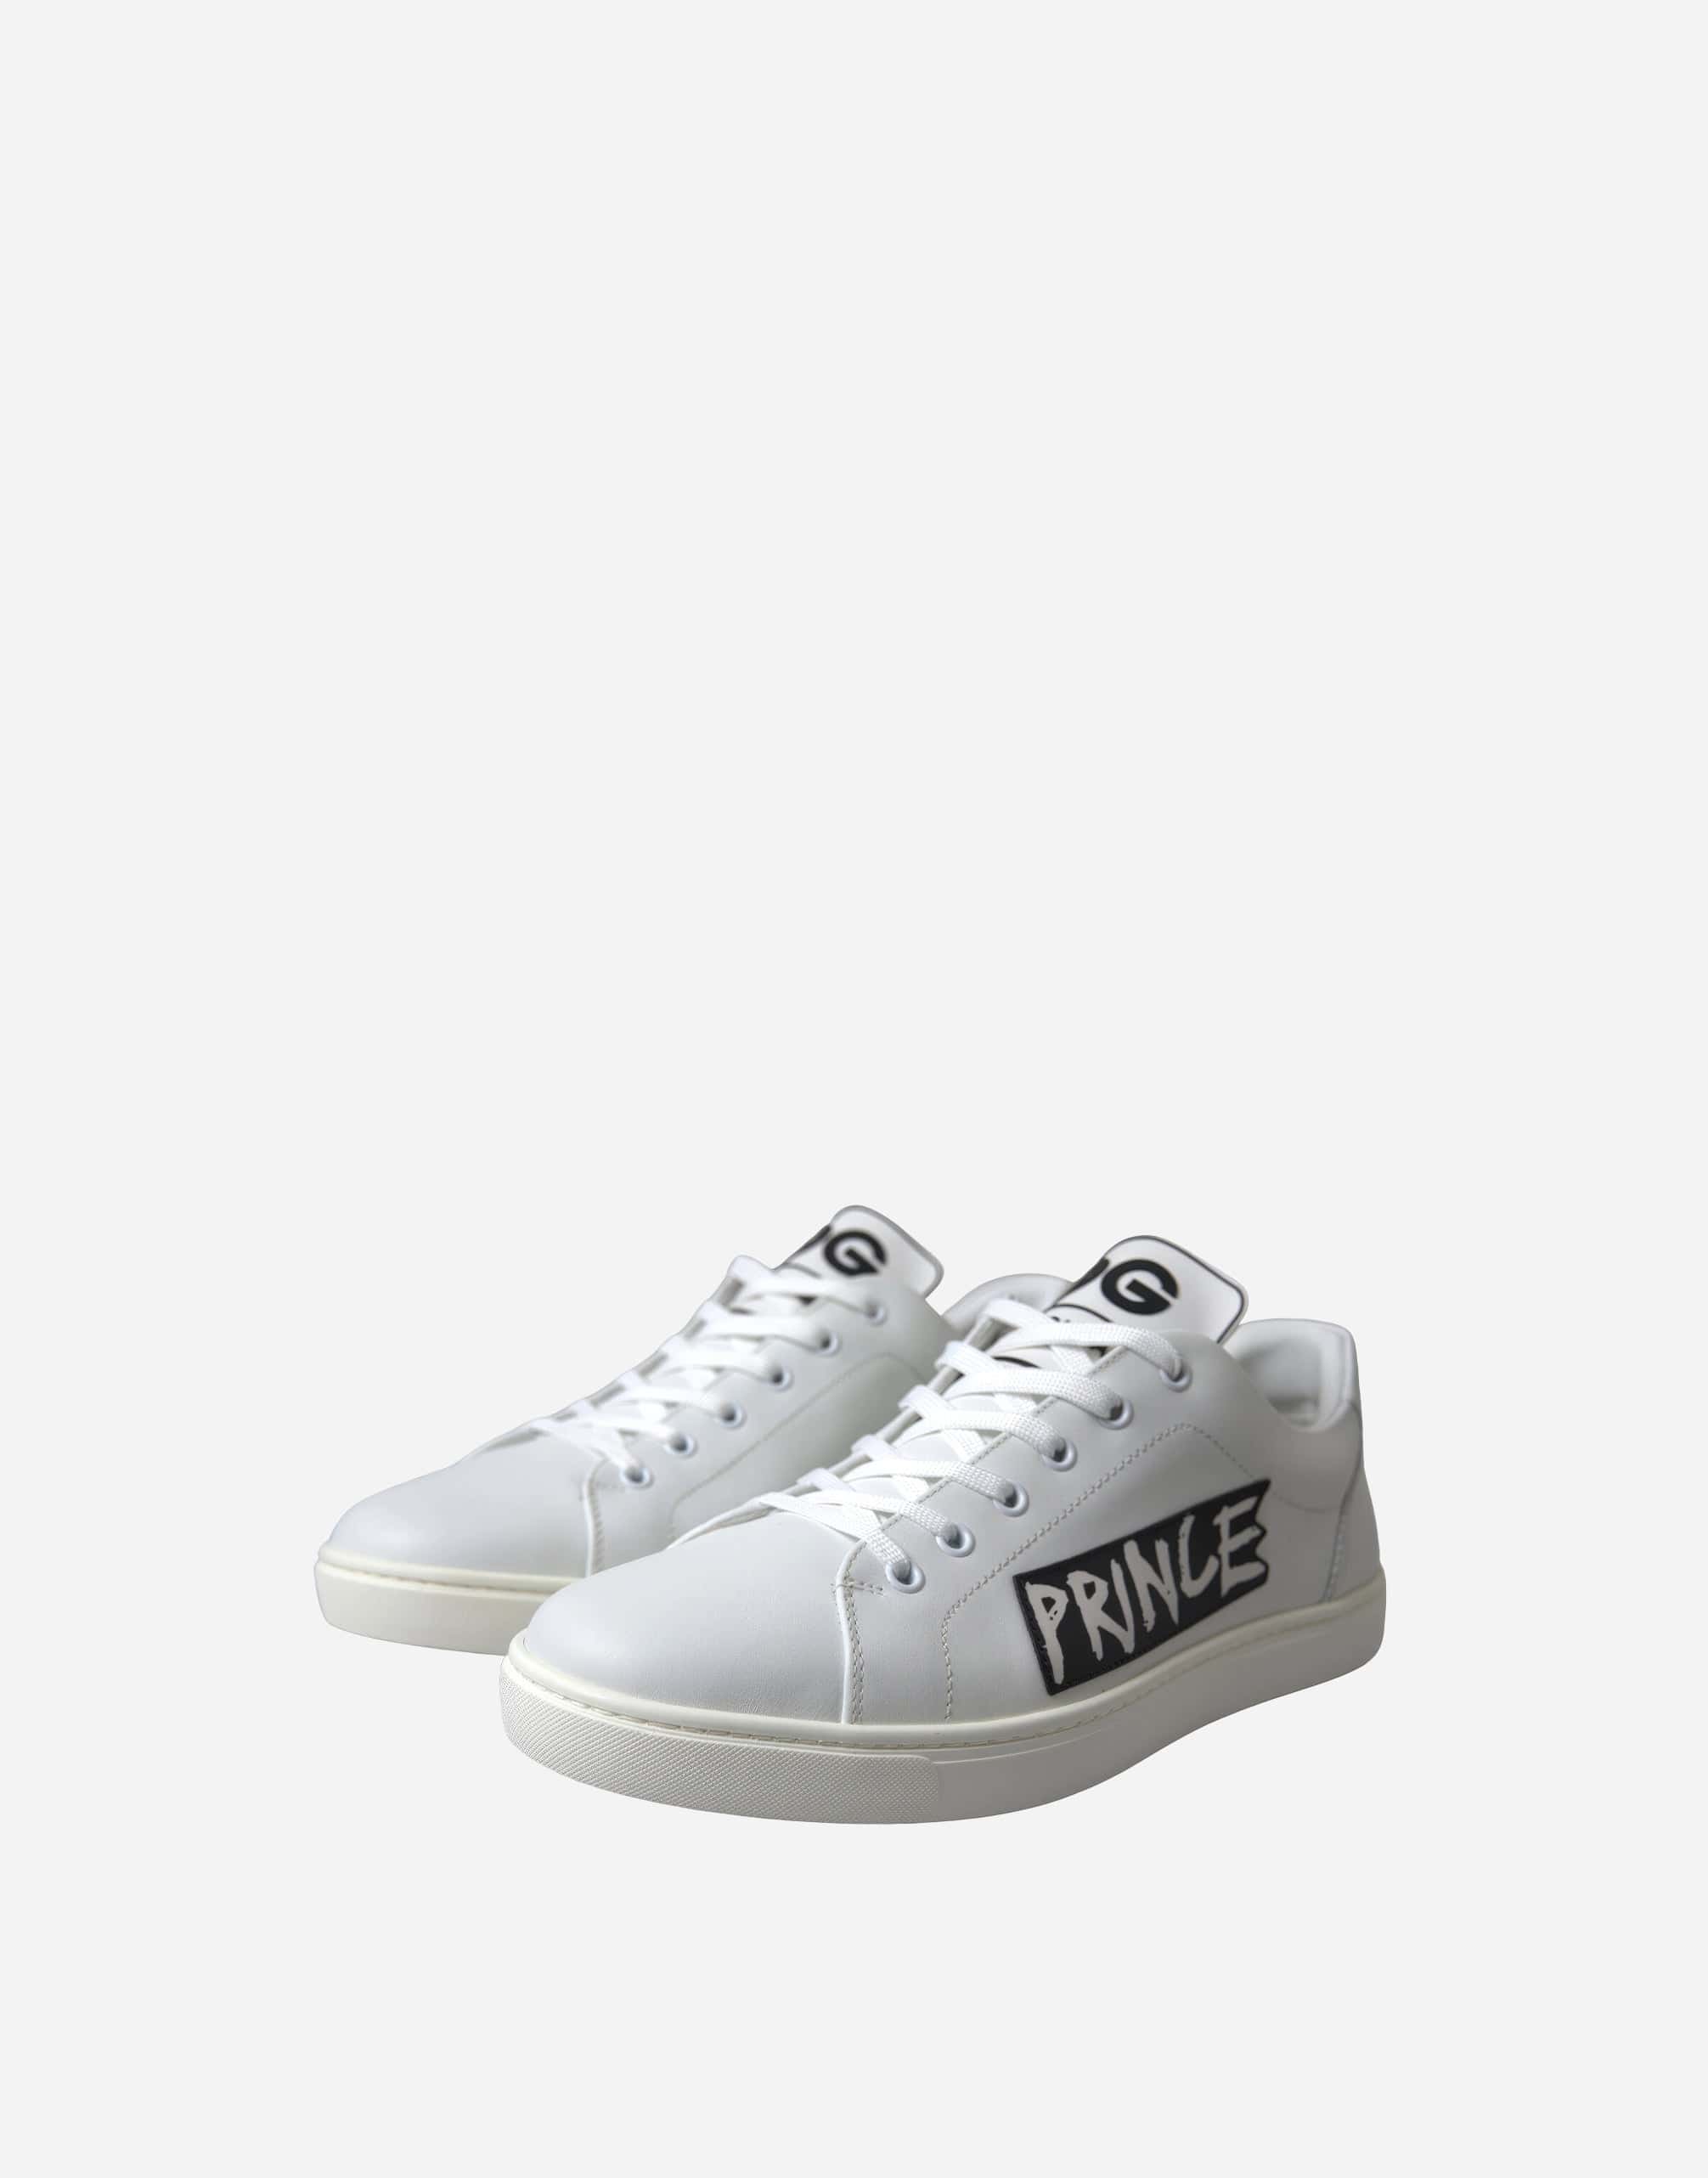 Dolce & Gabbana Forever Prince Sneakers